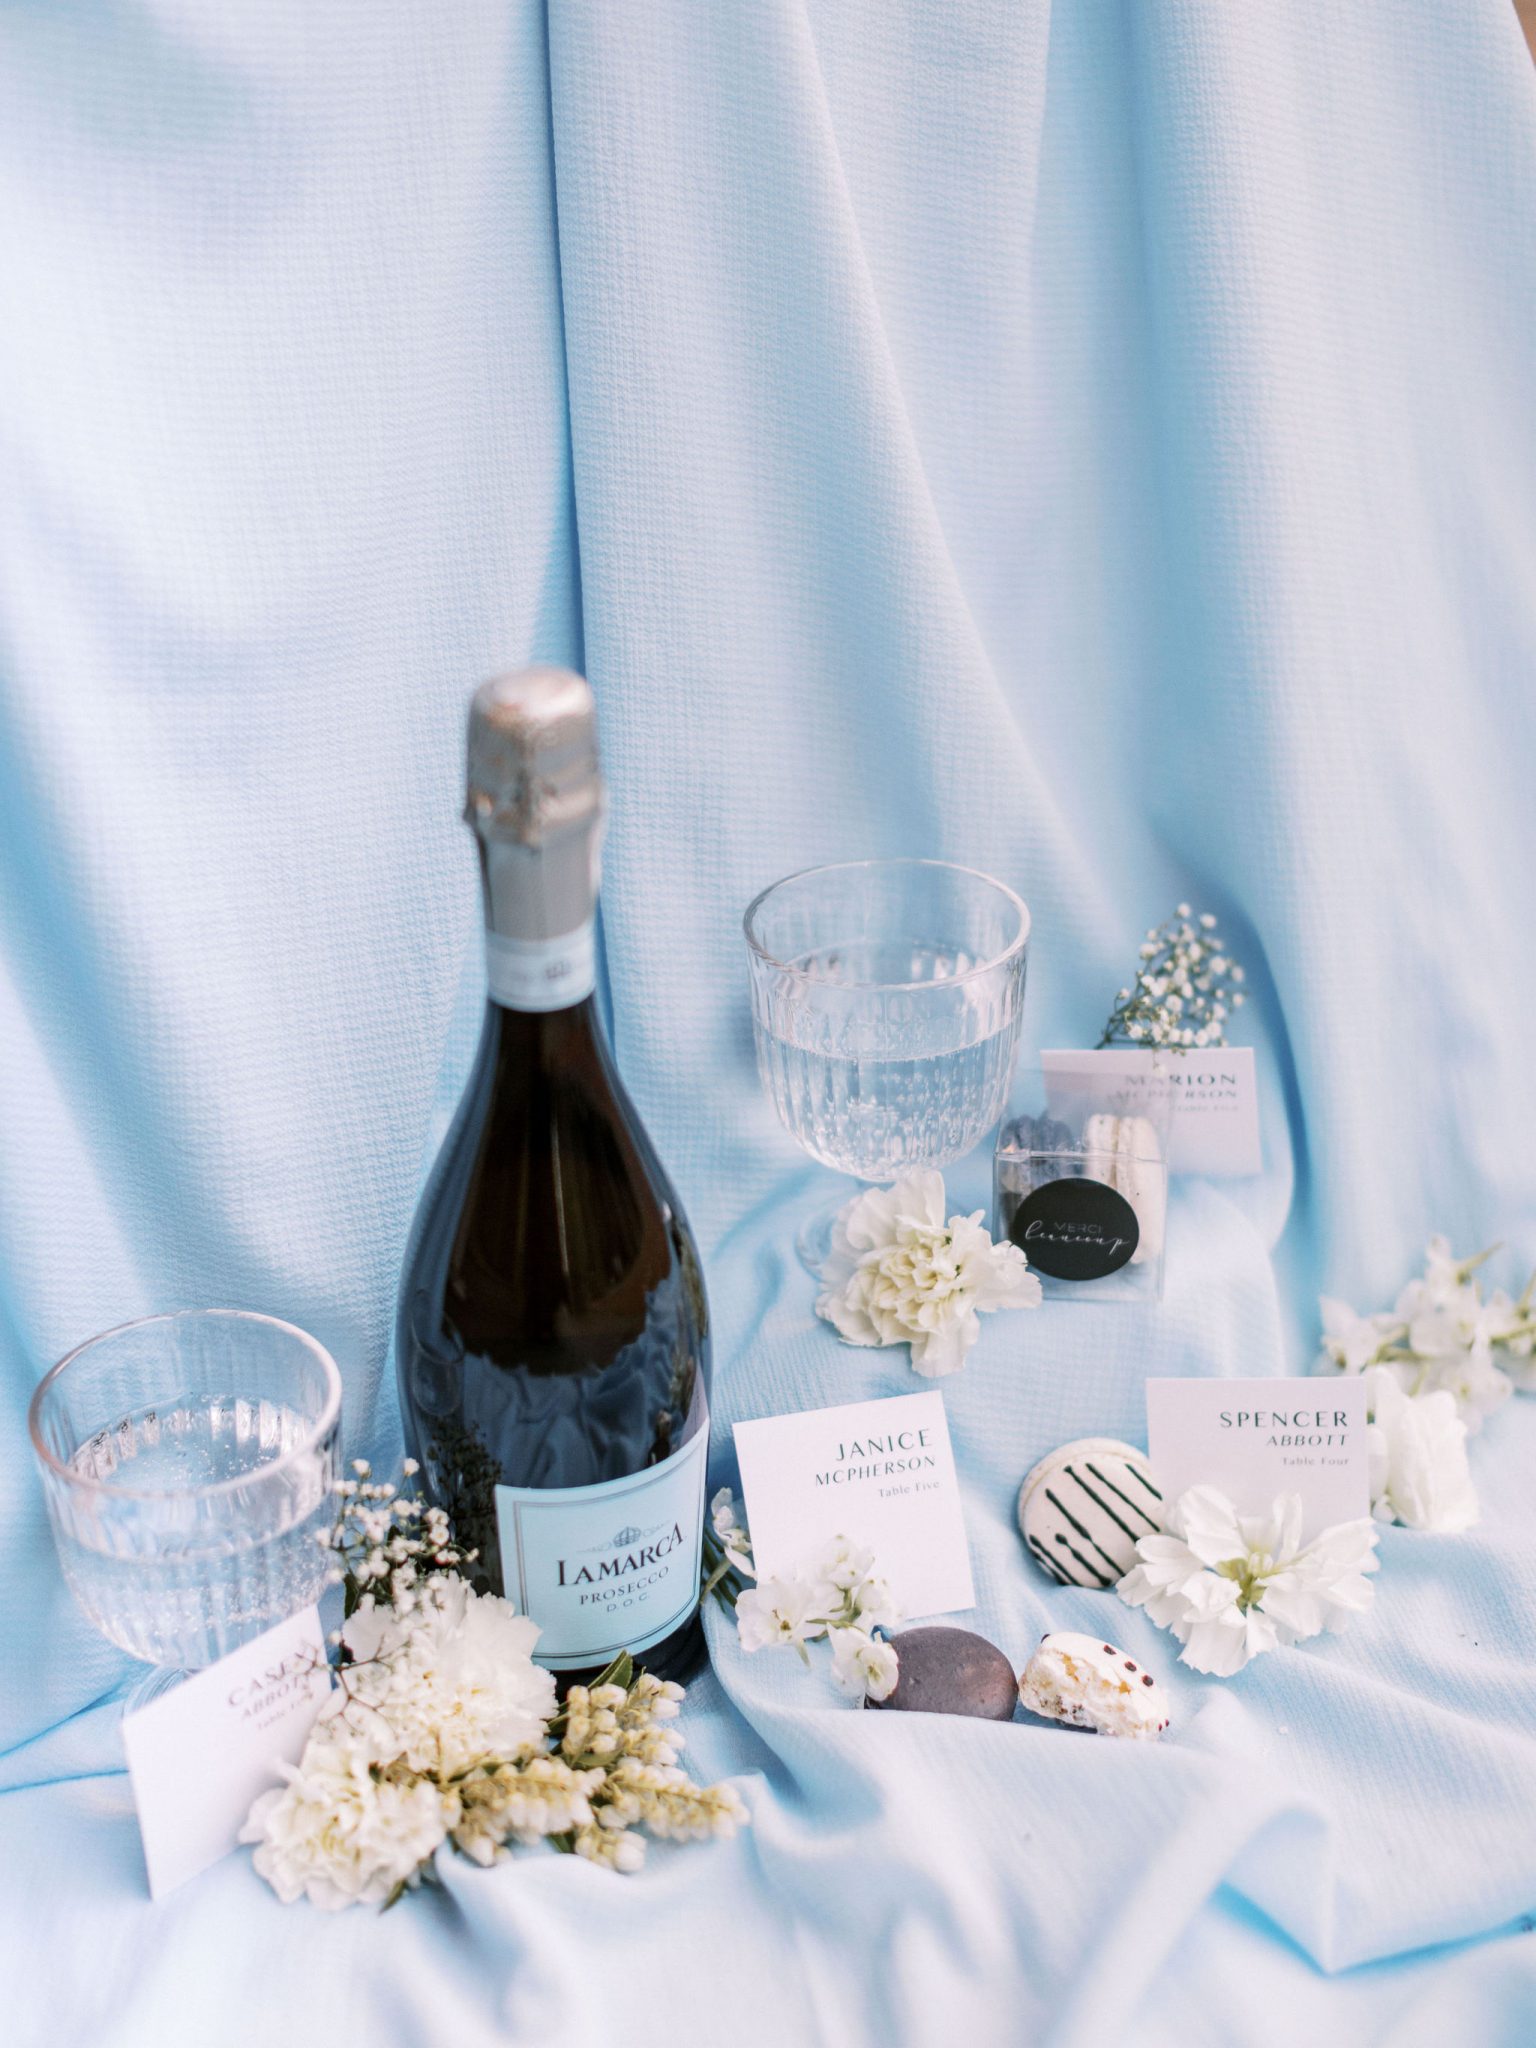 Lamarca champagne with monochromatic macarons set against a robin blue backdrop